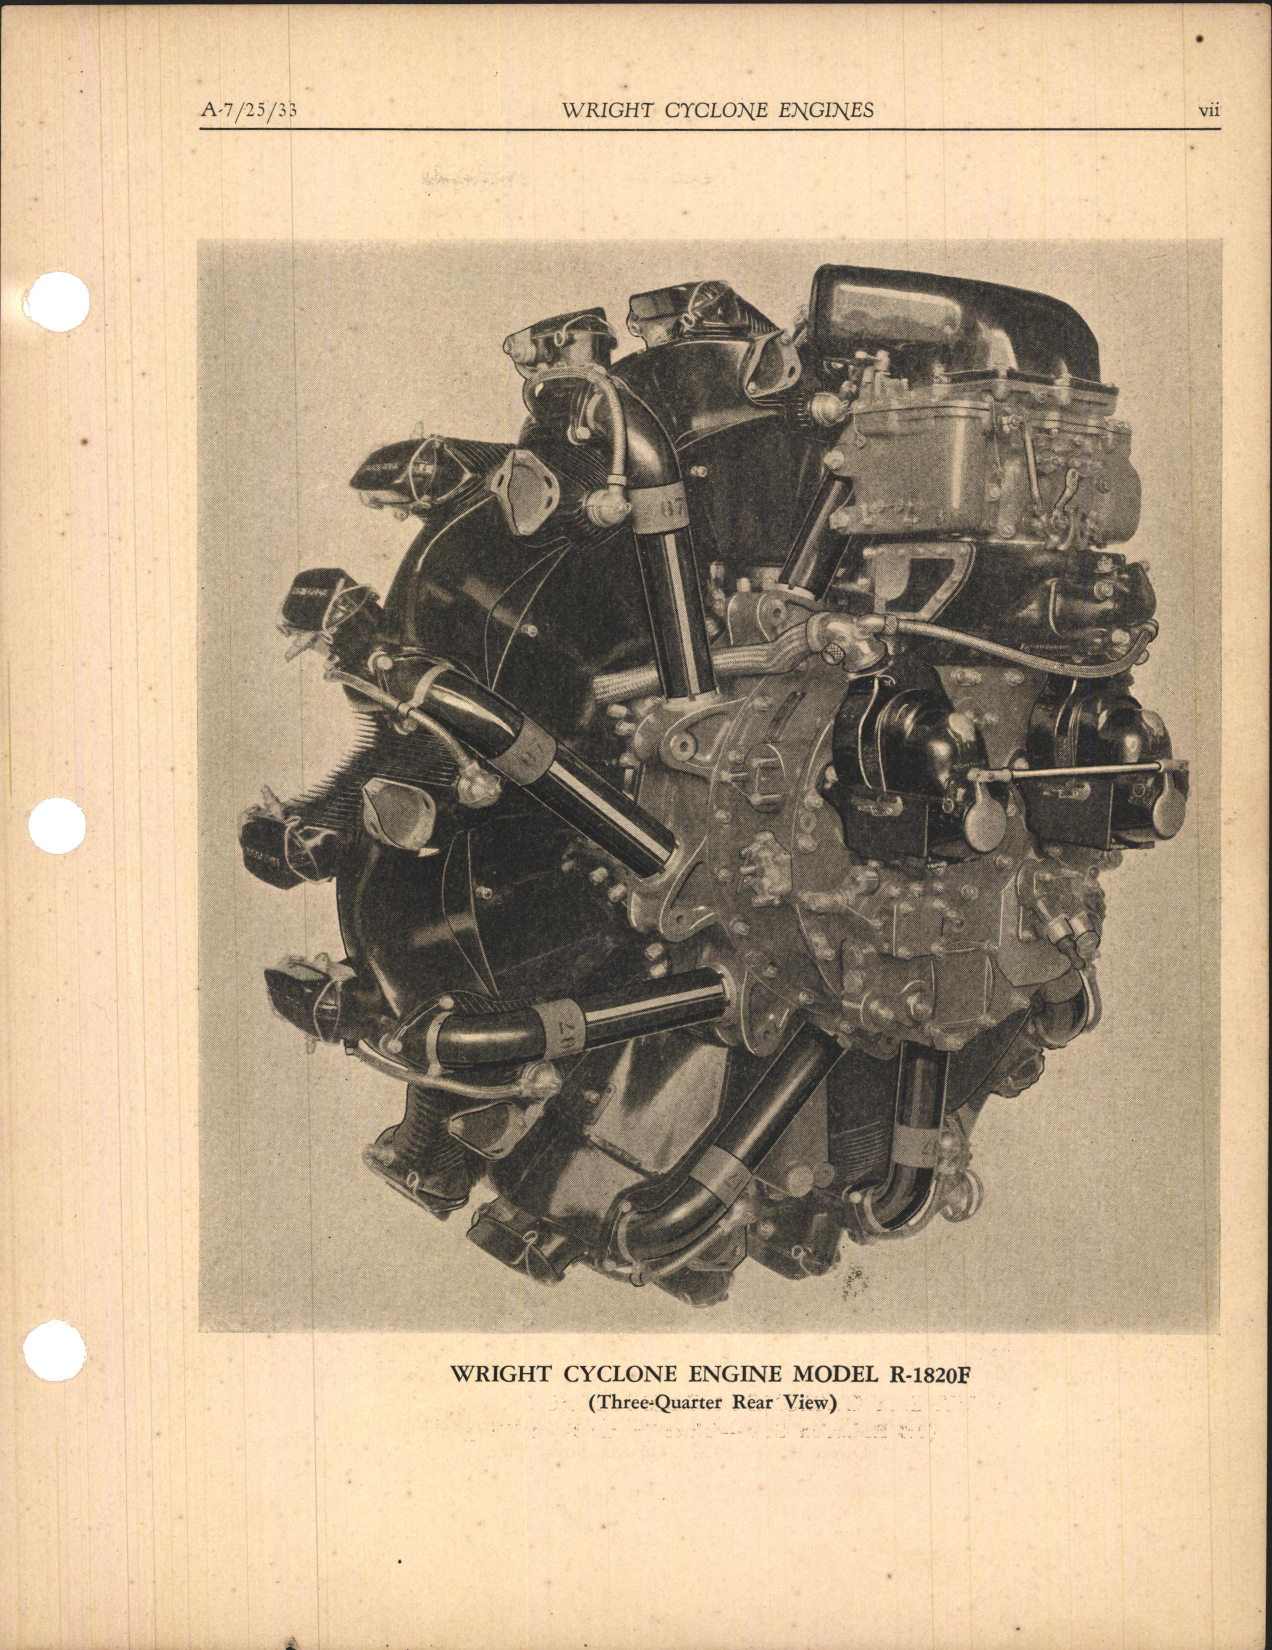 Sample page 7 from AirCorps Library document: Installation, Inspection, and Maintenance of the Wright Cyclone R-1820-F and GR-1820-F